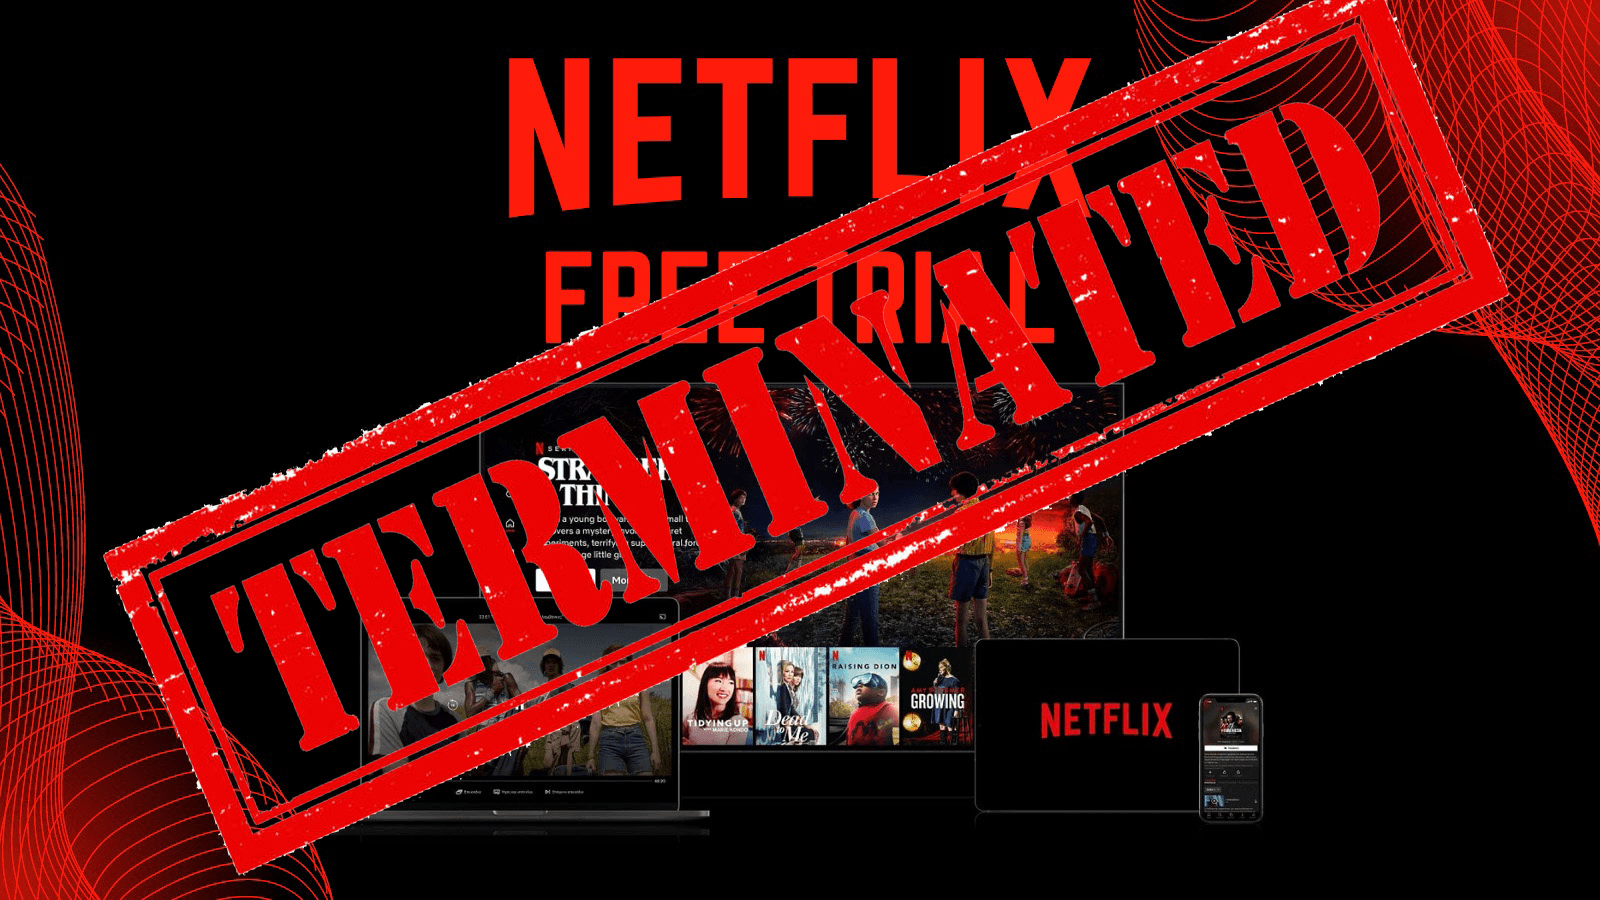 There is no Netflix free trial anymore